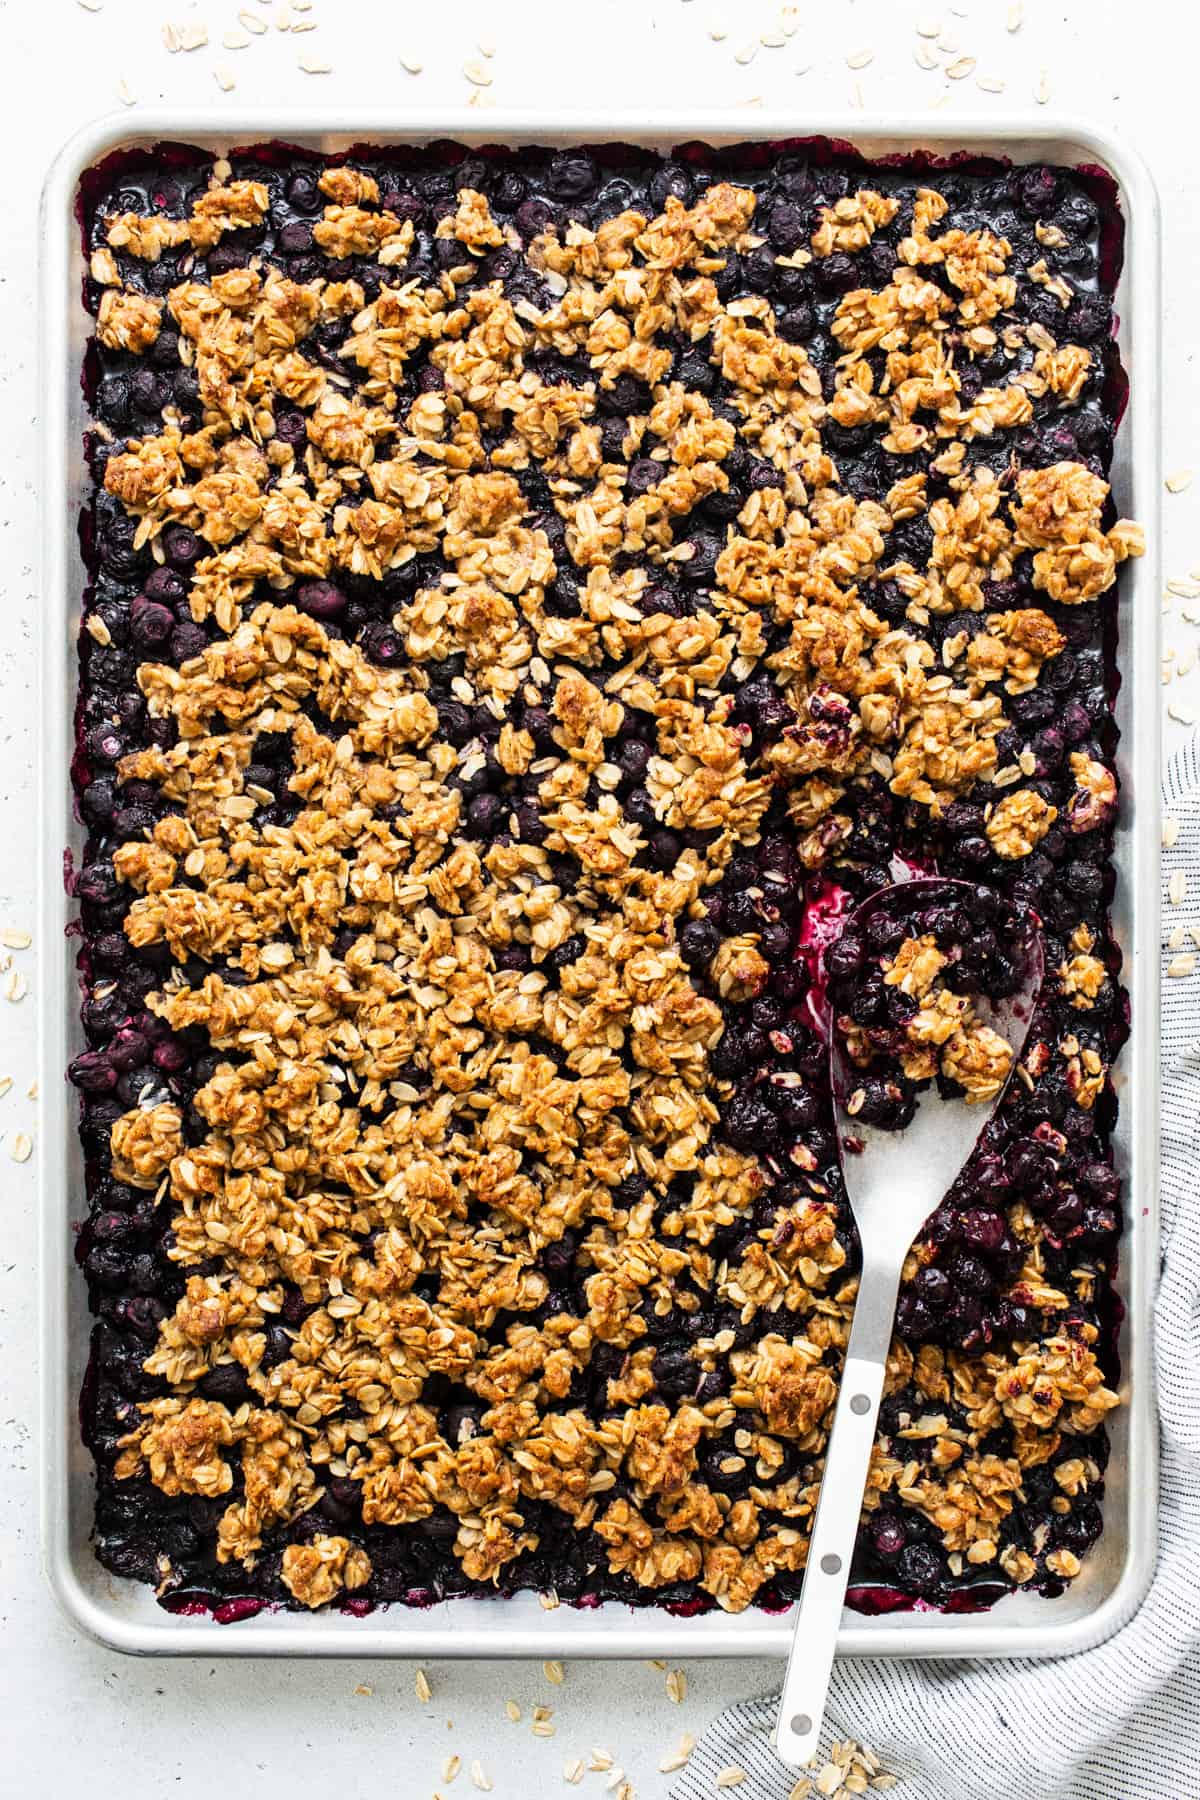 A baked blueberry oatmeal c،ble in a rectangular pan with a serving s،.